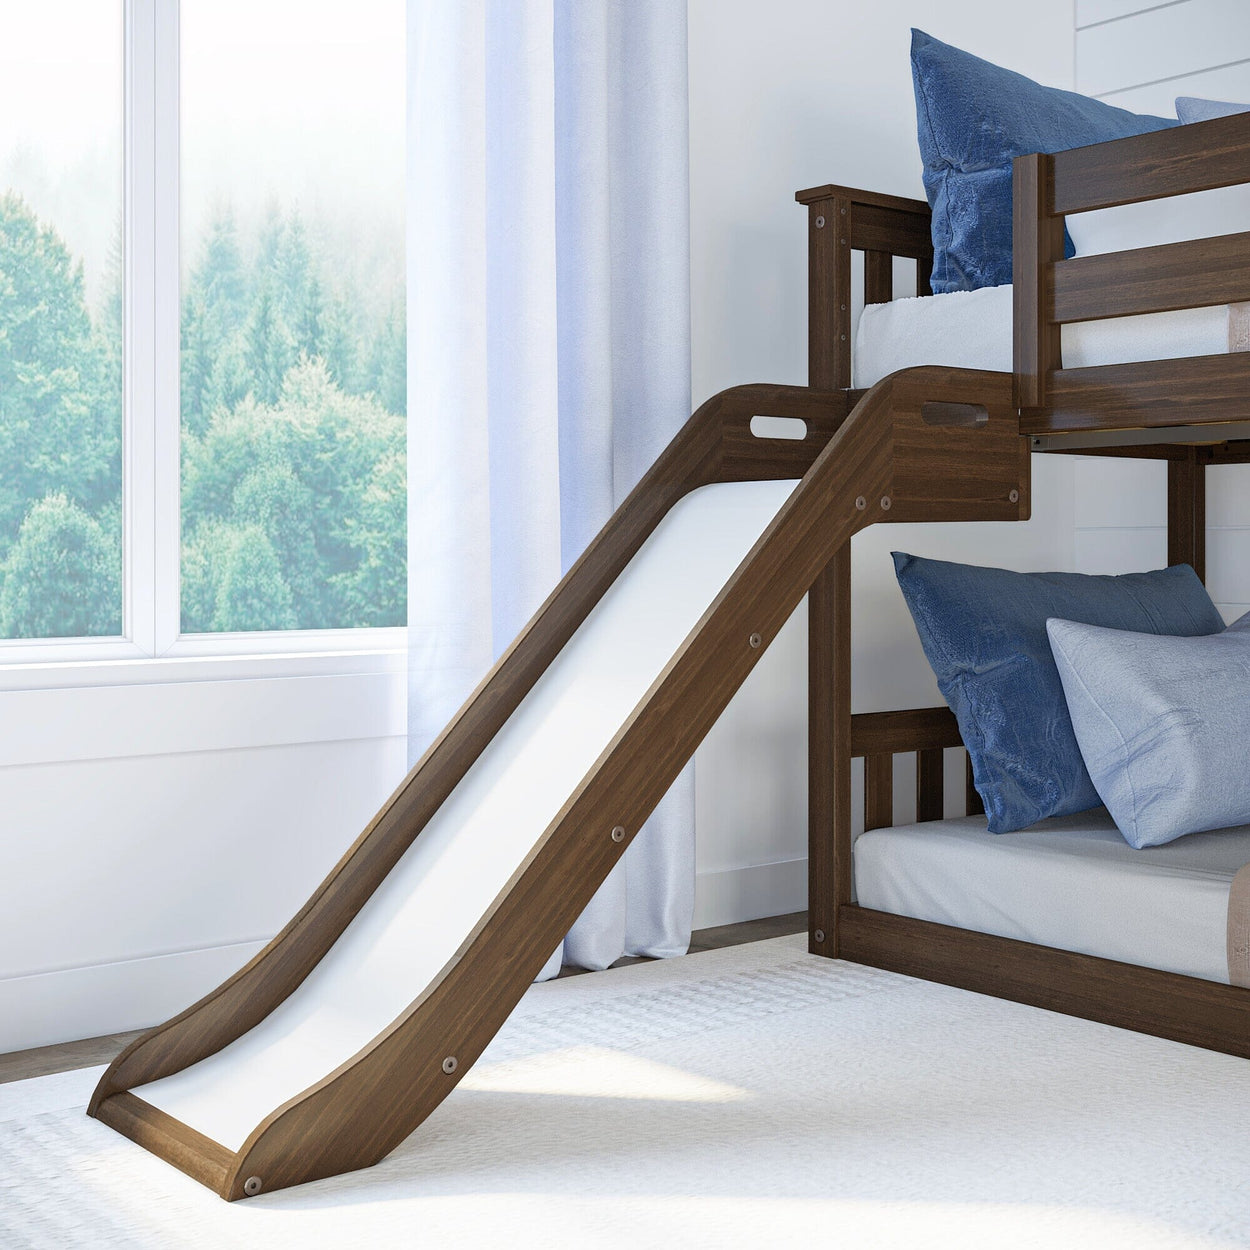 185421-008 : Bunk Beds Classic Low Bunk with Stairs and Easy Slide, Walnut